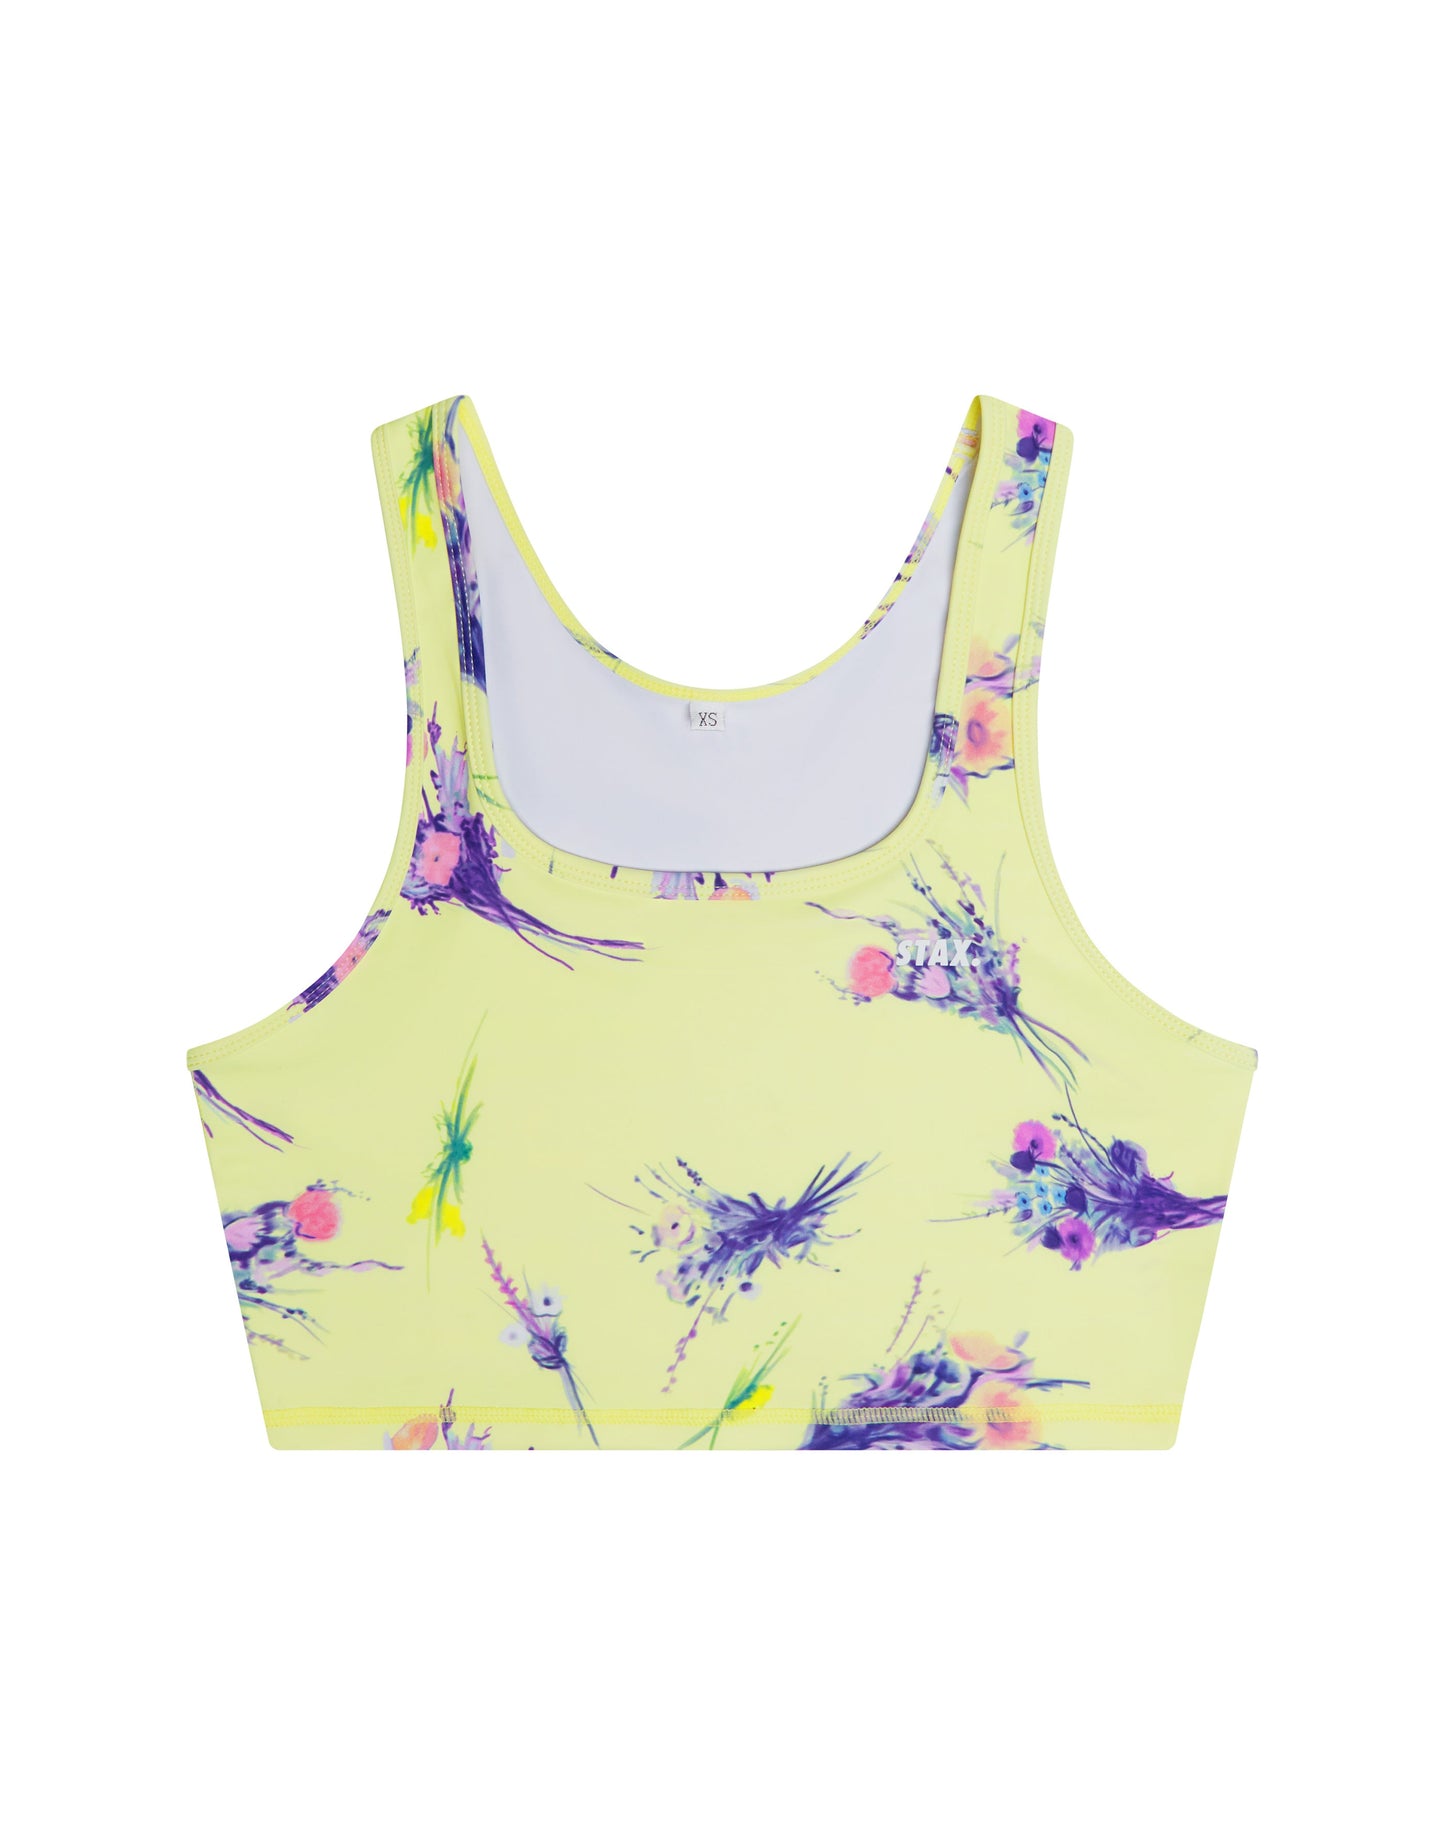 STAX. Spring Collection Cropped Tank - Sunflower